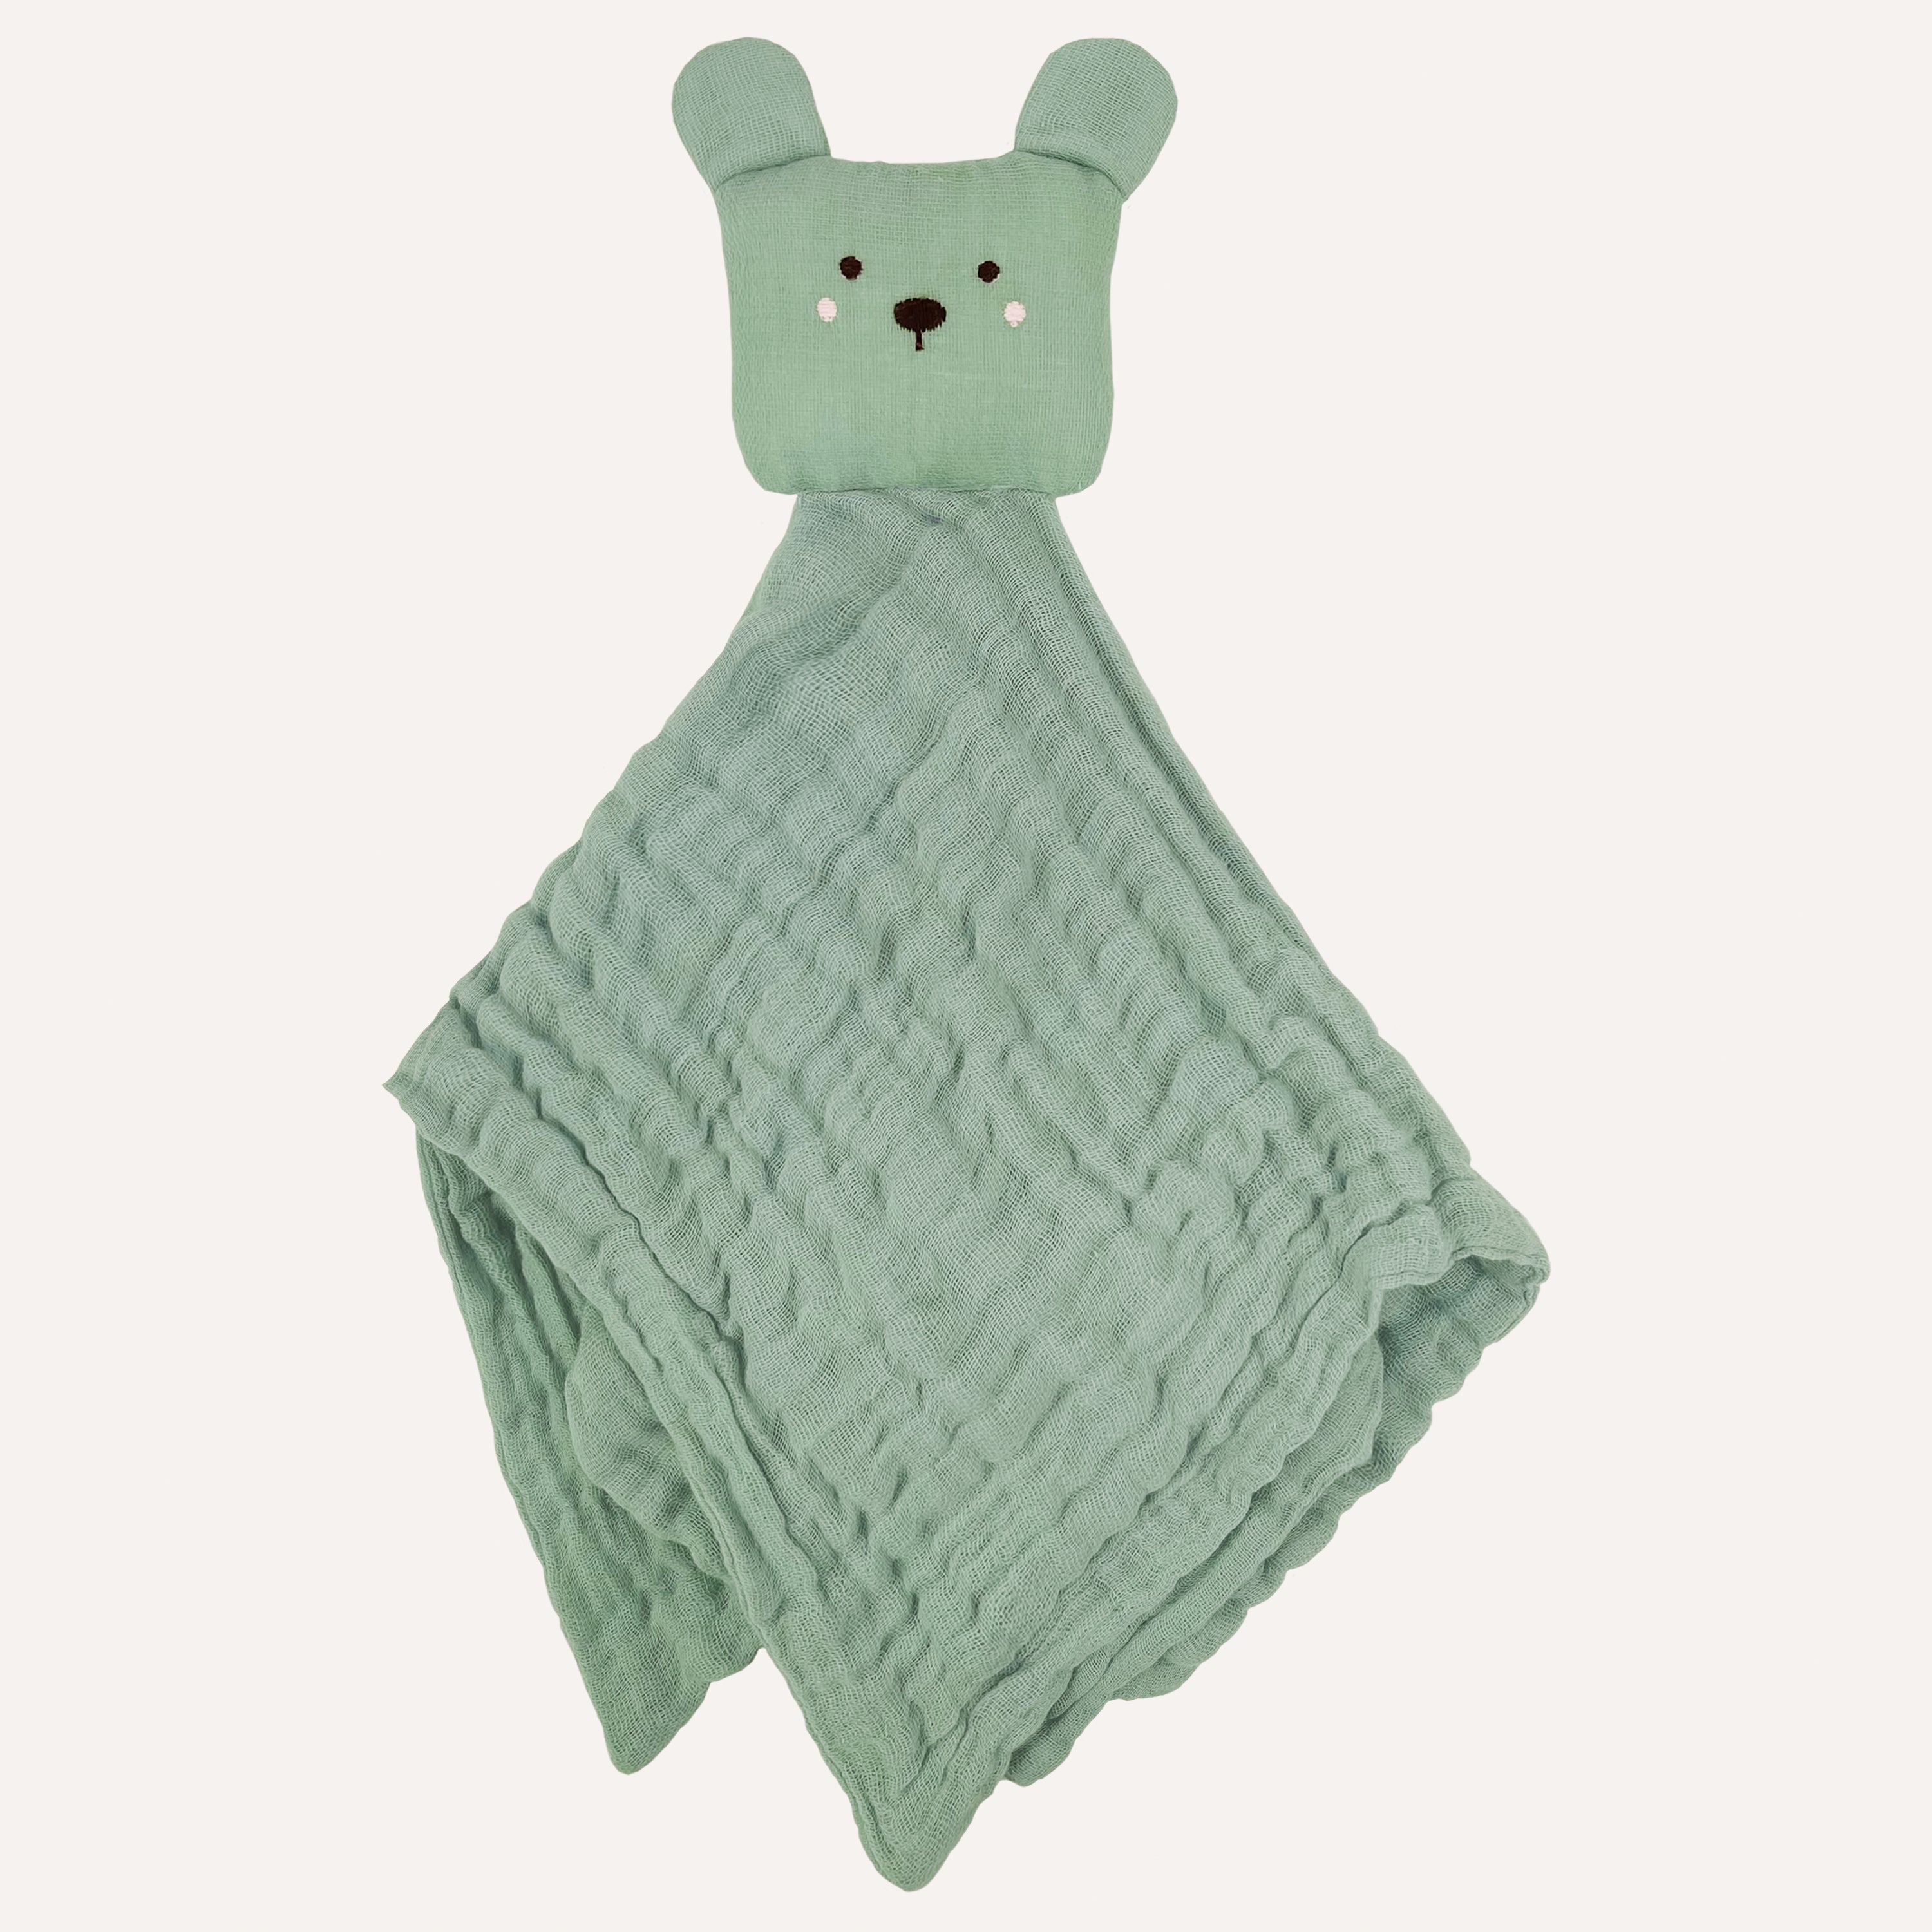 Abracadabra Organics Collectible Security Blanket With Cuddle Toy - Bear